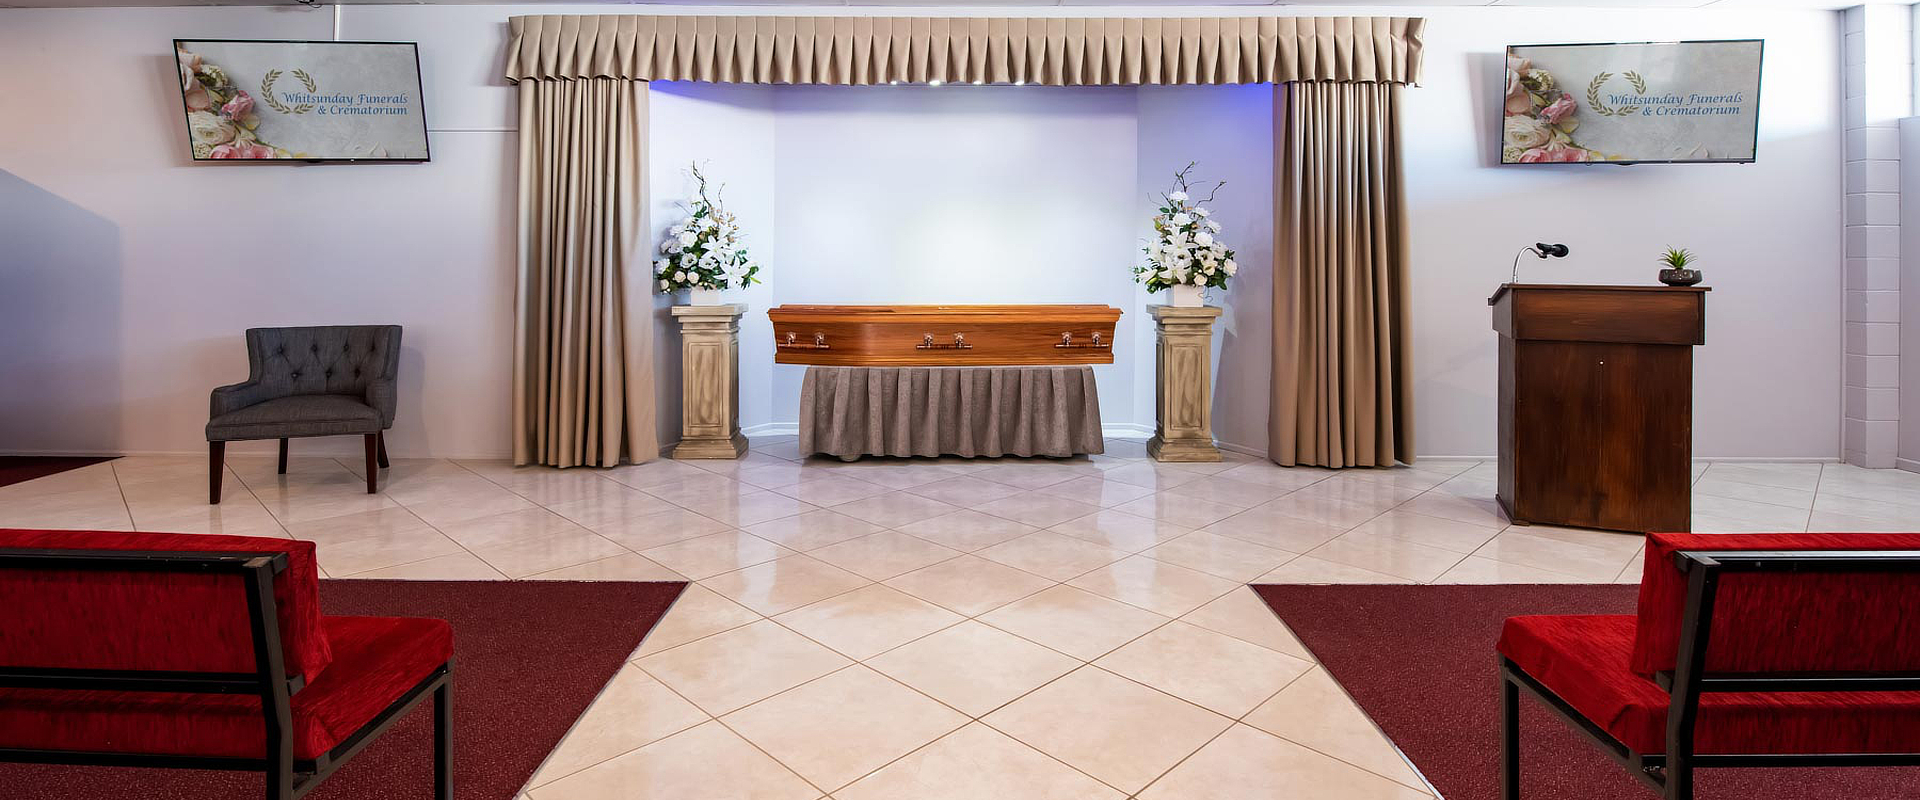 The 5 Underlying Issues of the Australian Funeral Industry